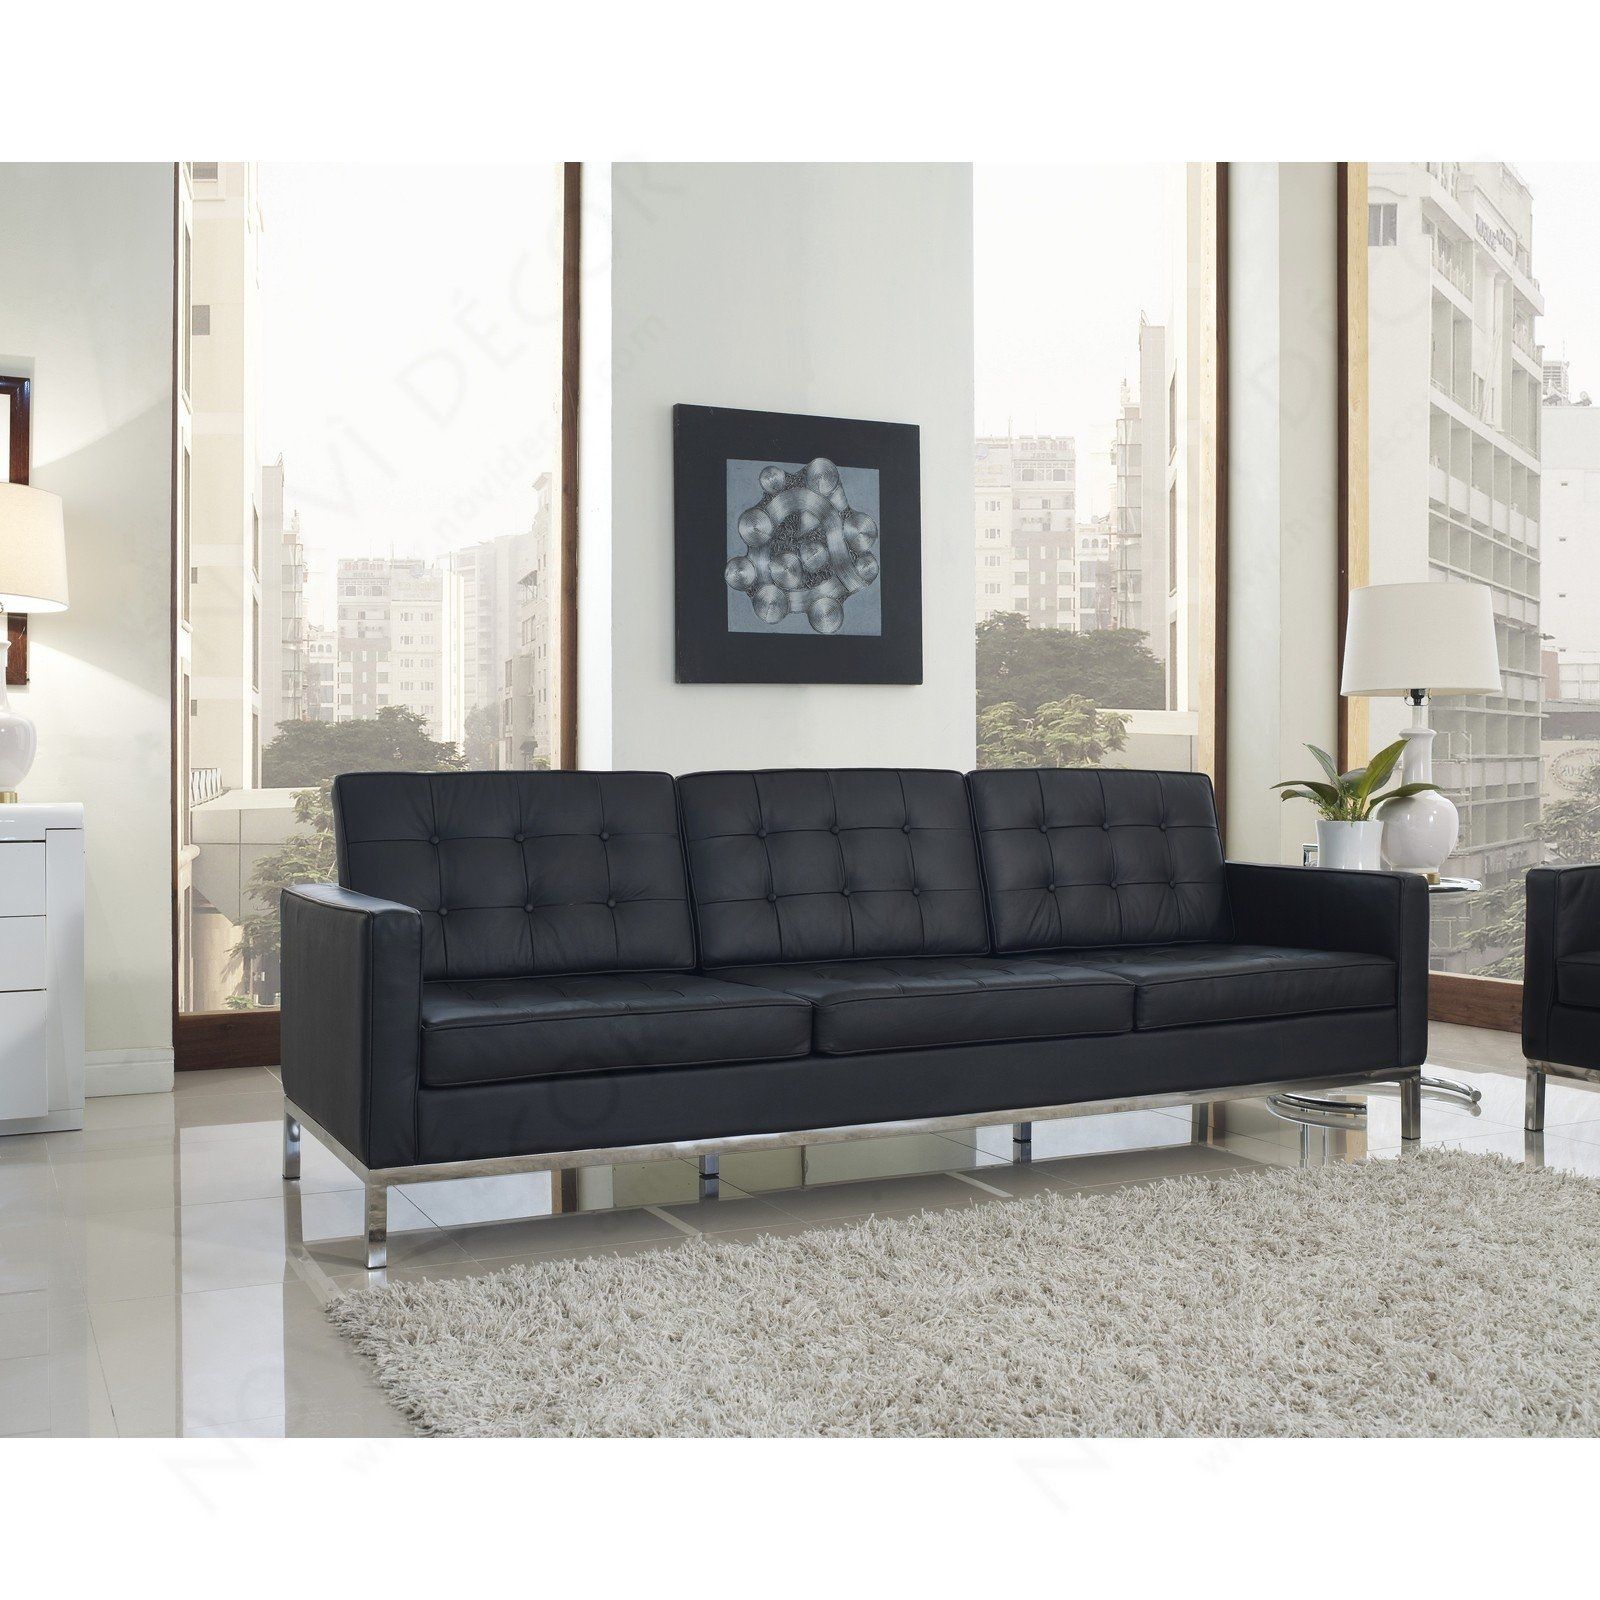 Florence Style Sofa Multiple Colors Designer Reproduction With Regard To Florence Sofas And Loveseats (View 2 of 15)